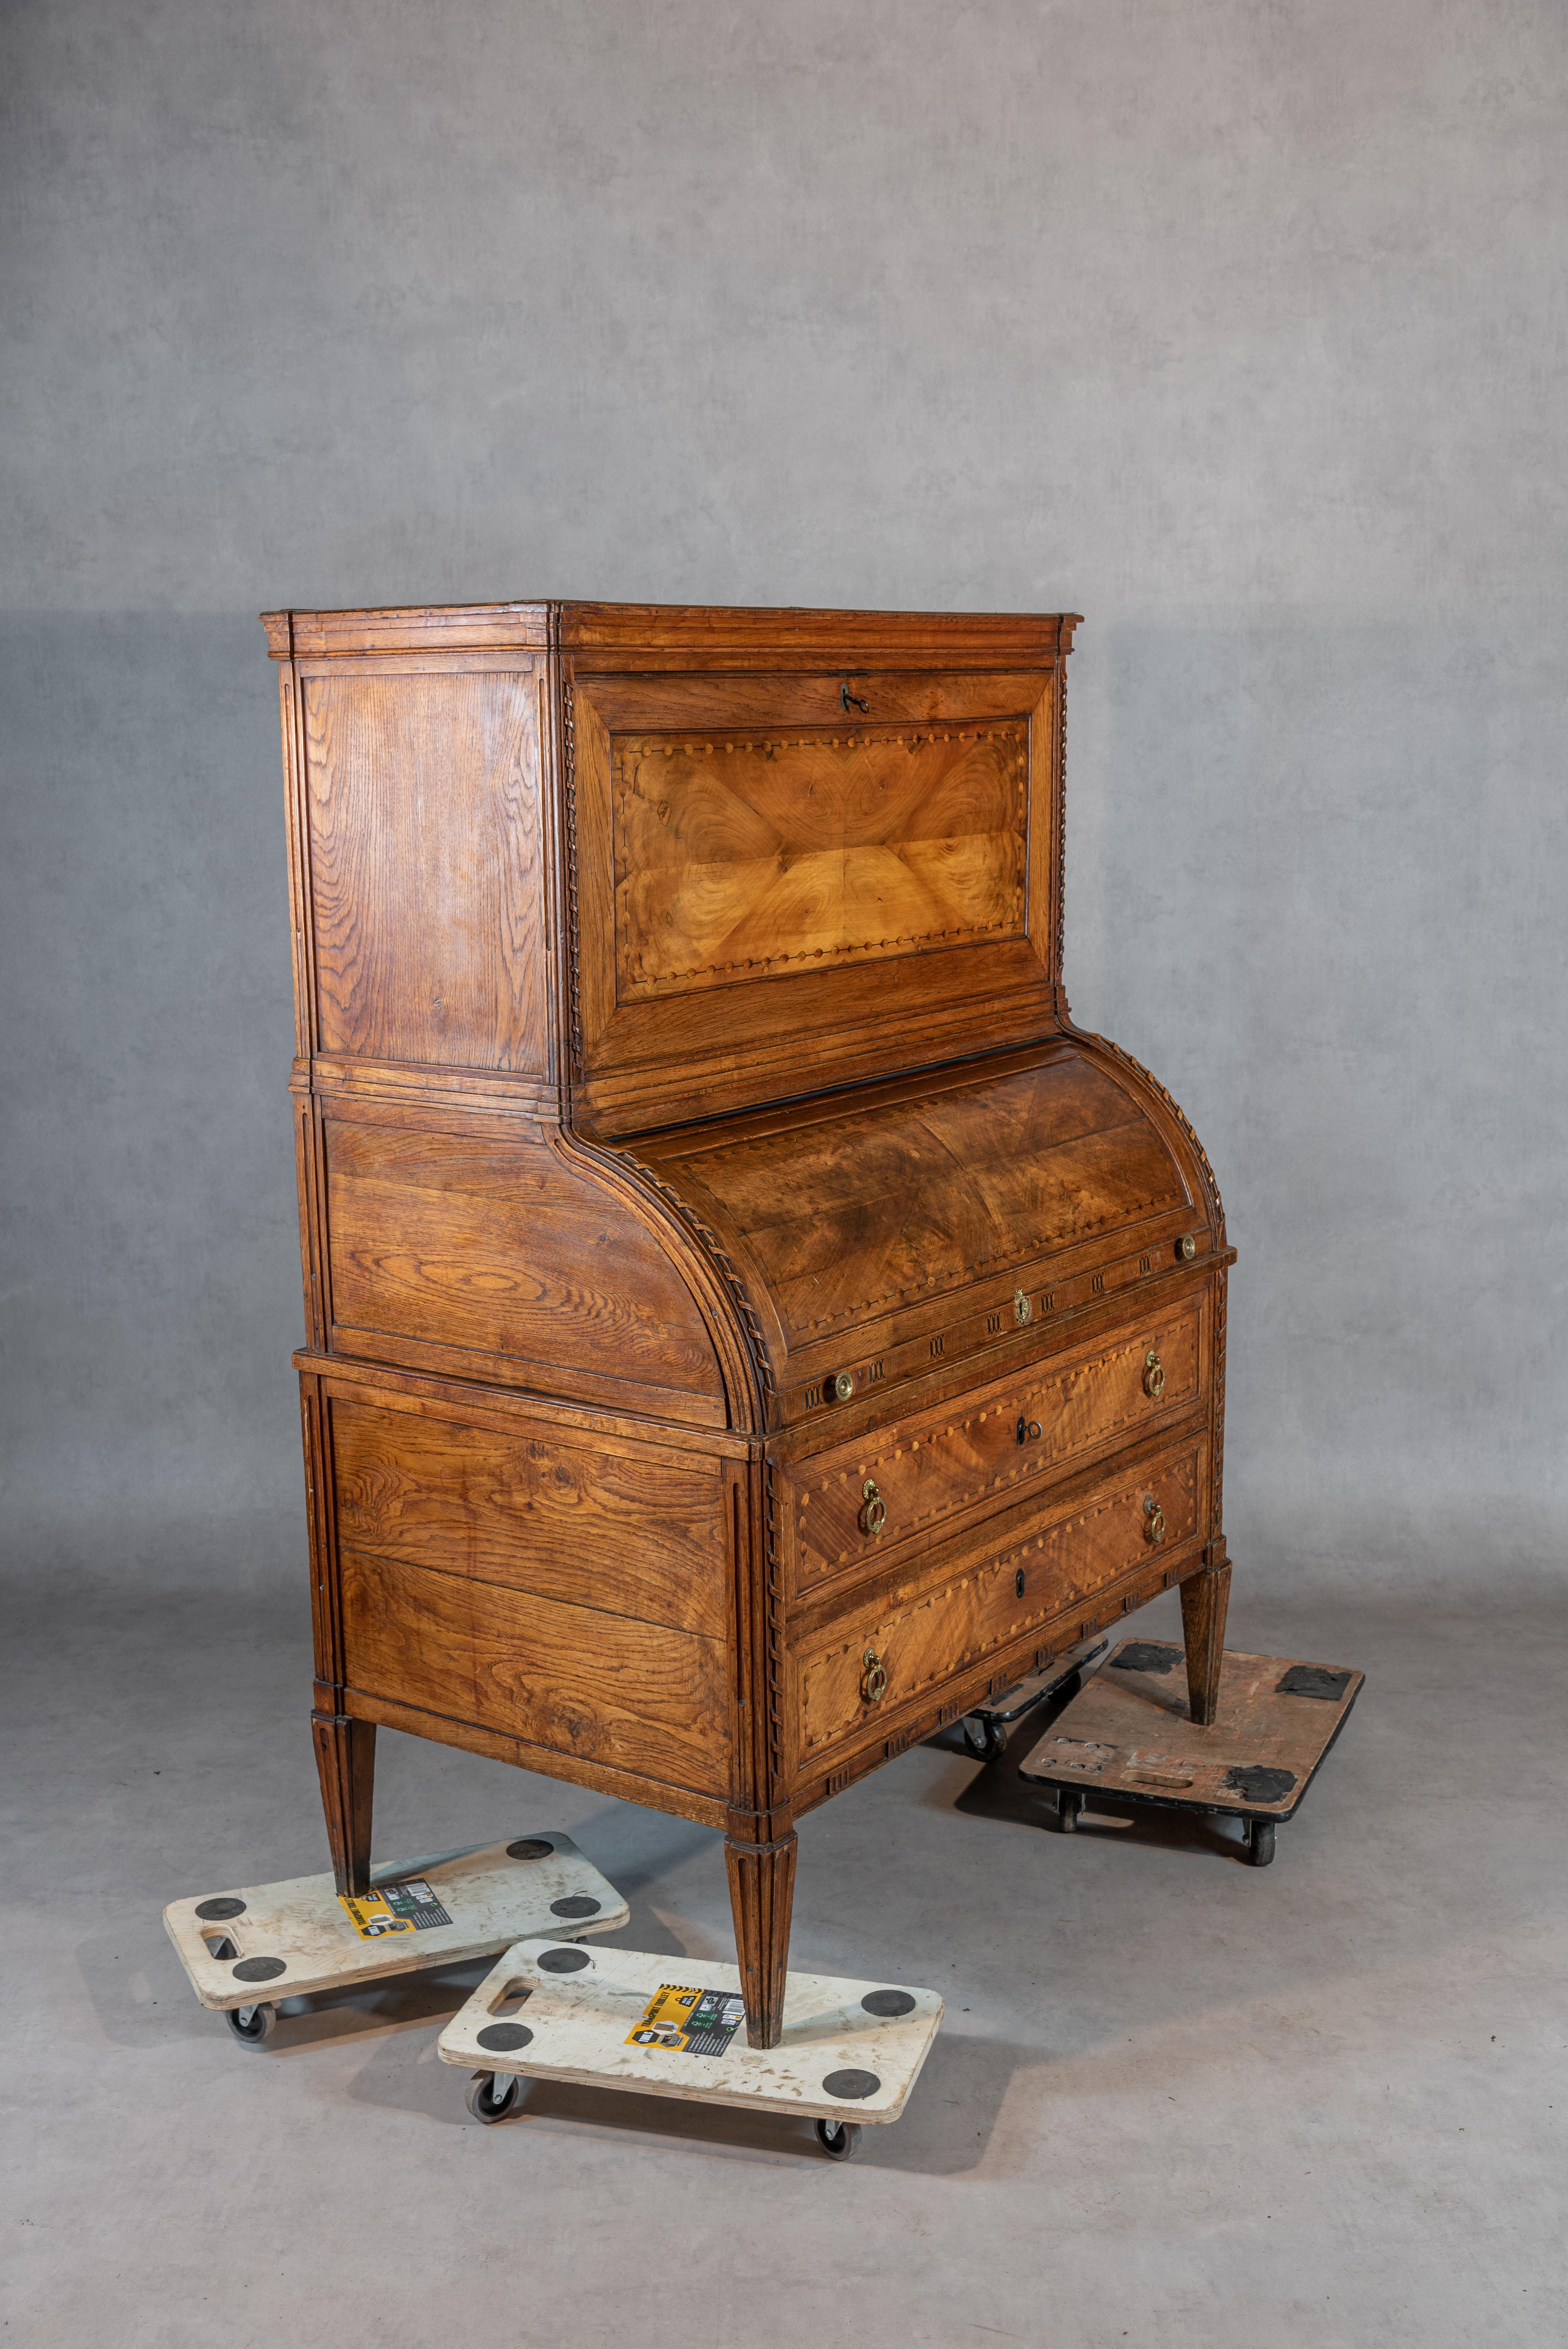 French 18th Century Louis XVI Period Marquetry Desk In Good Condition For Sale In San Antonio, TX